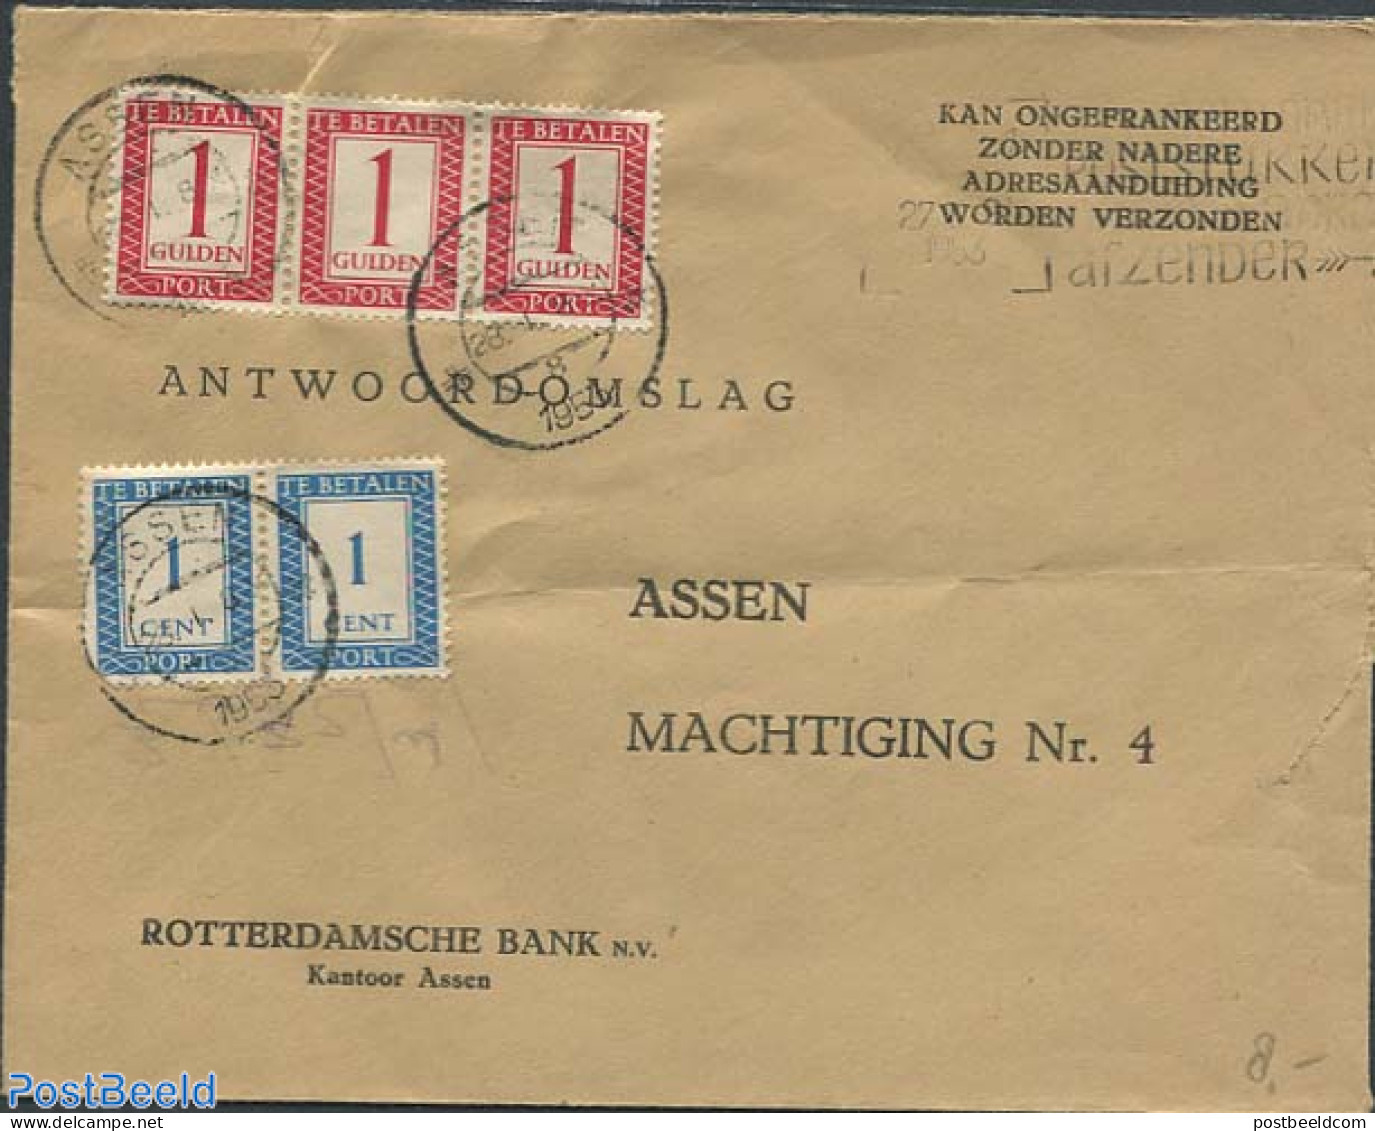 Netherlands 1953 Postage Due 3x Gulden And 2x1 C, Postal History - Covers & Documents